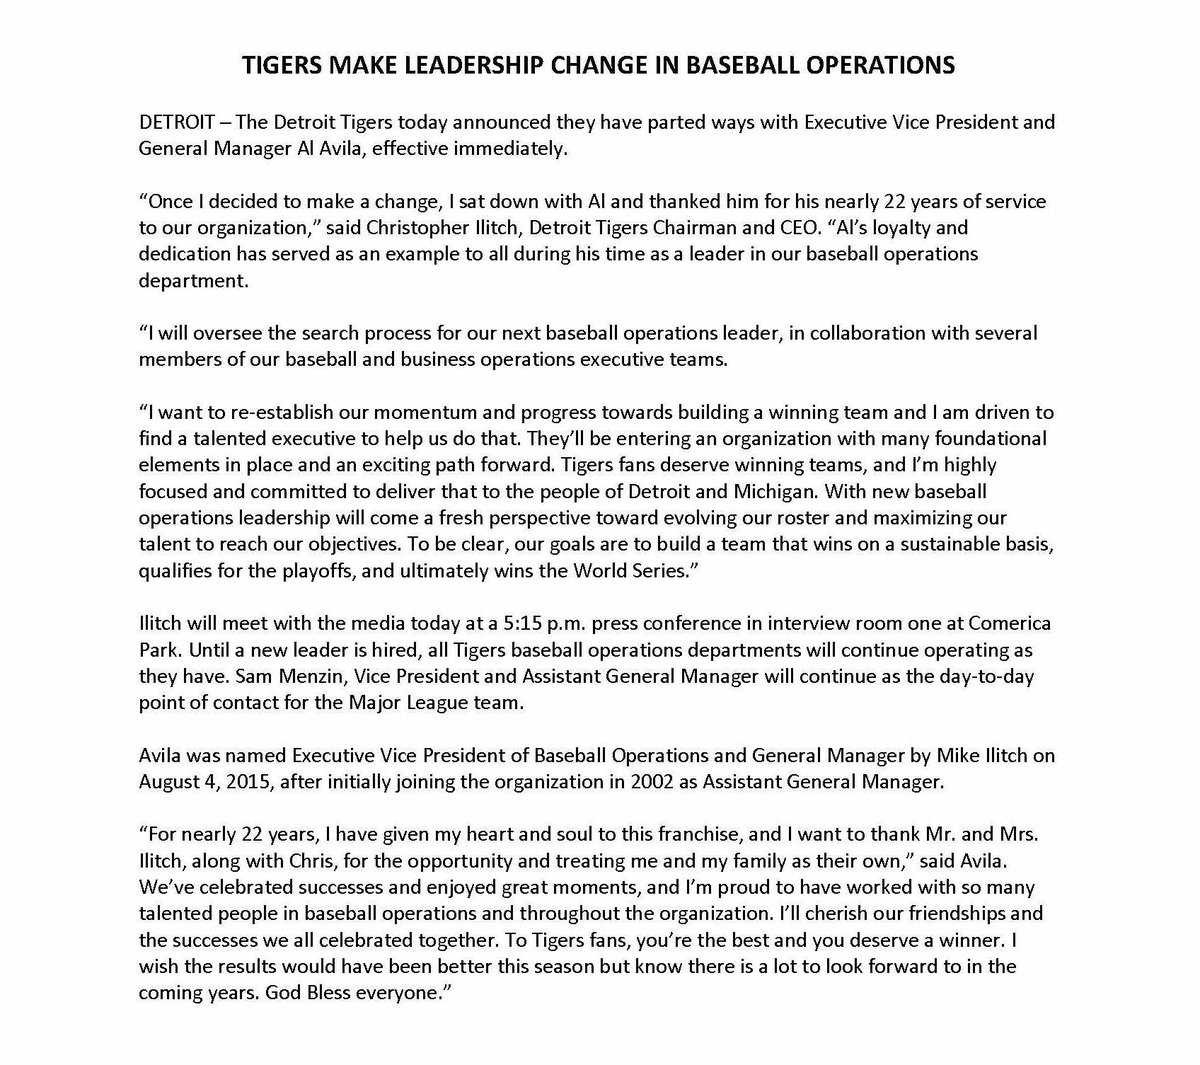 The Detroit Tigers today announced they have parted ways with Executive Vice President and General Manager Al Avila, effective immediately.